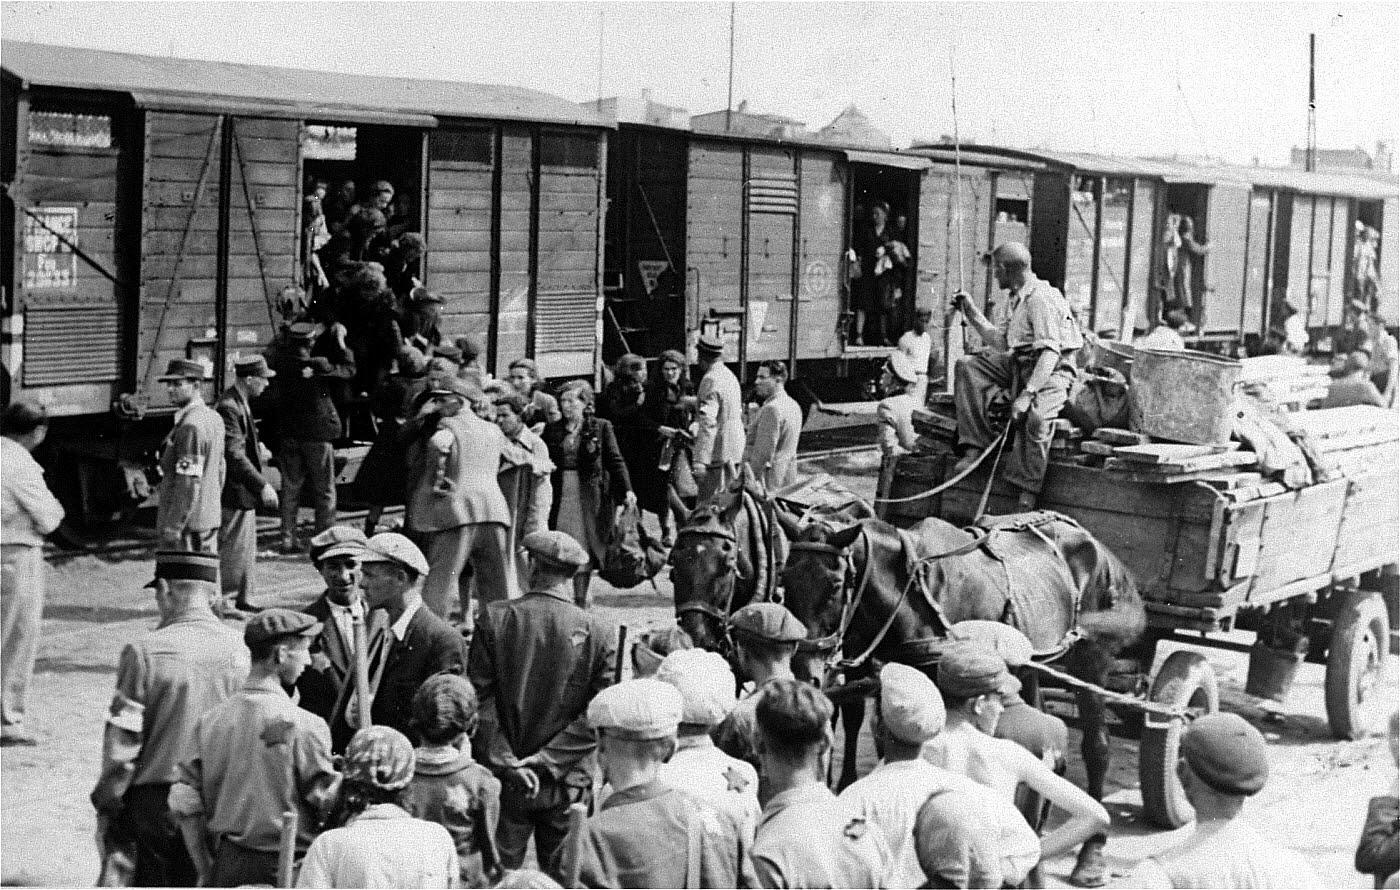 Following the public announcement of the establishment of the Lodz ghetto on February 8, 1940, Jews were expelled from all other parts of the city and moved into the ghetto area. 164,000 Jews were imprisoned in the ghetto when the Germans sealed it off on April 30, 1940.